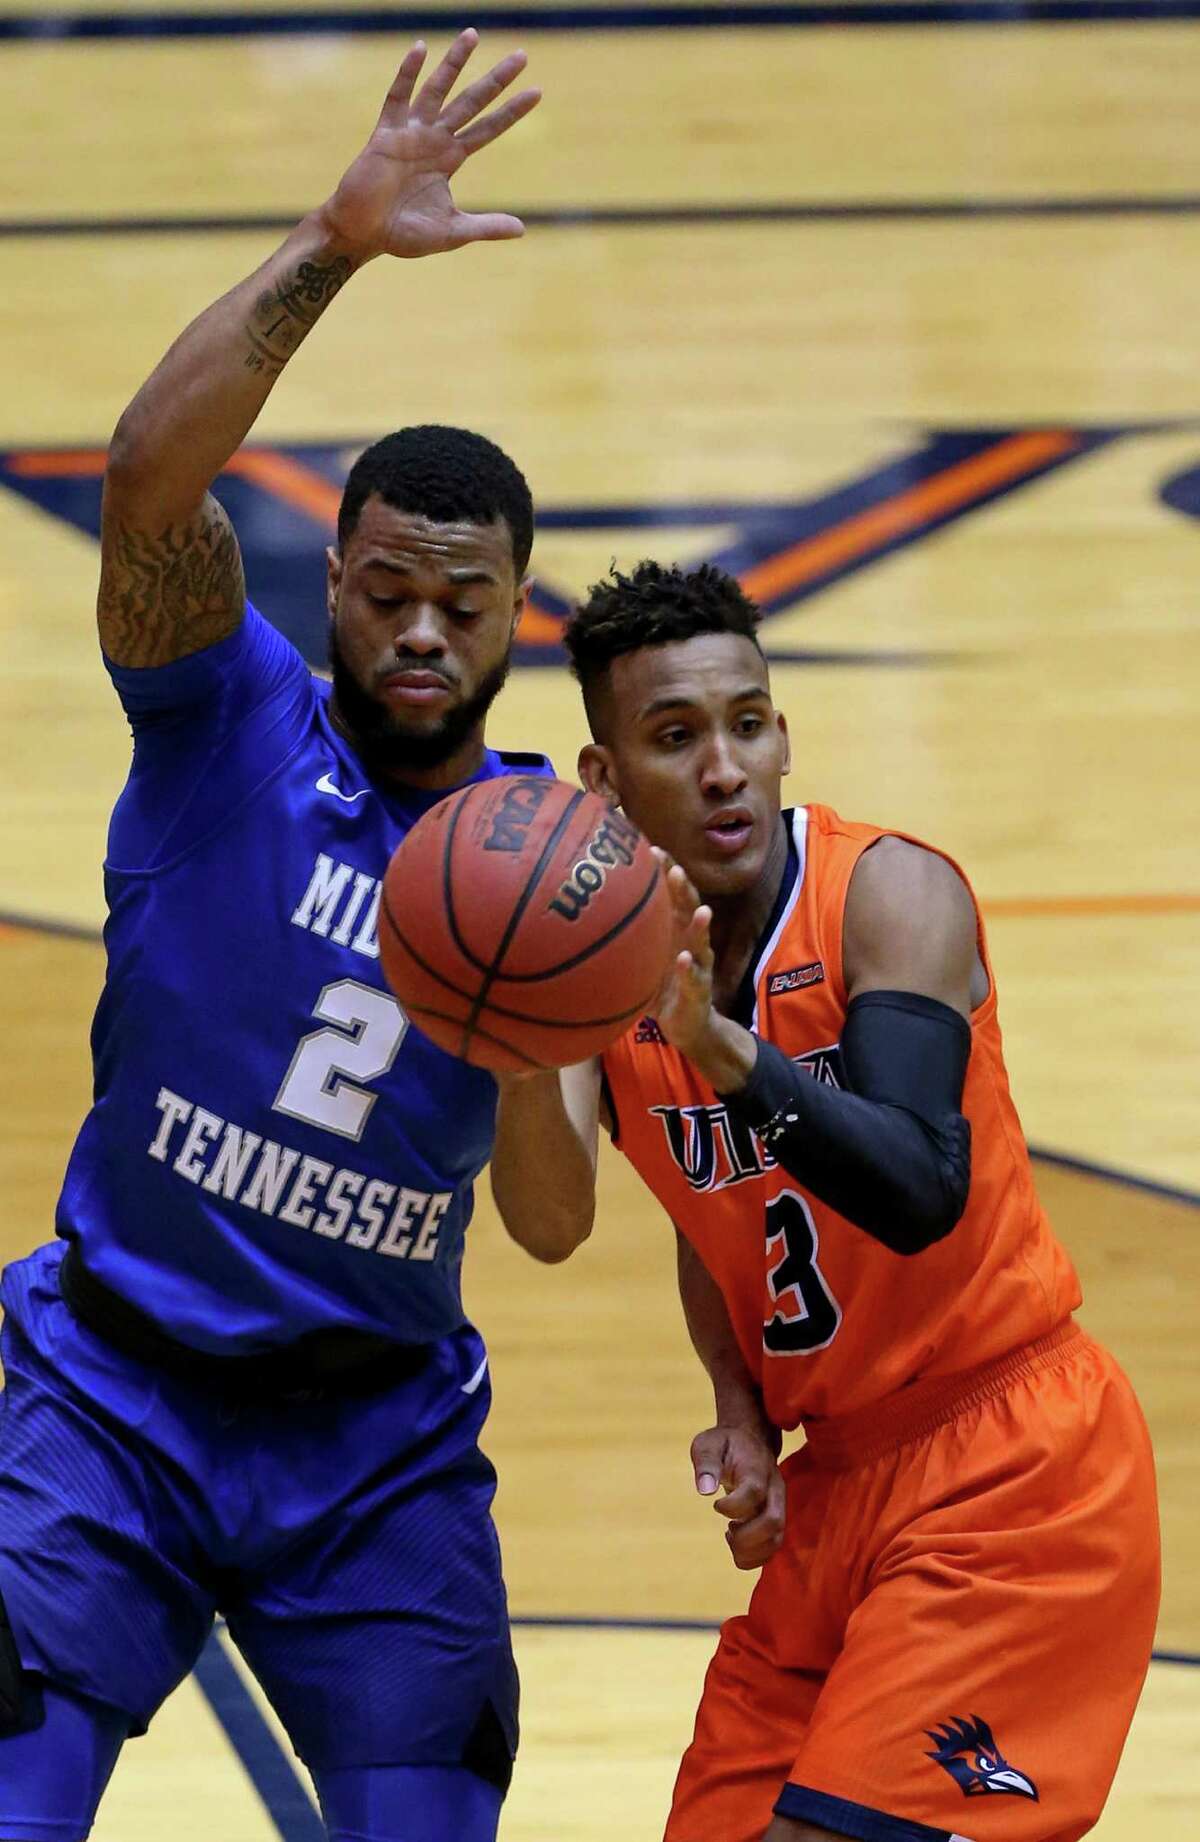 UTSA?•s Gino Littles passes around Middle Tennessee's Antwain Johnson during second half action Thursday Feb. 2, 2017 at the Convocation Center. Middle Tennessee won 69-59.